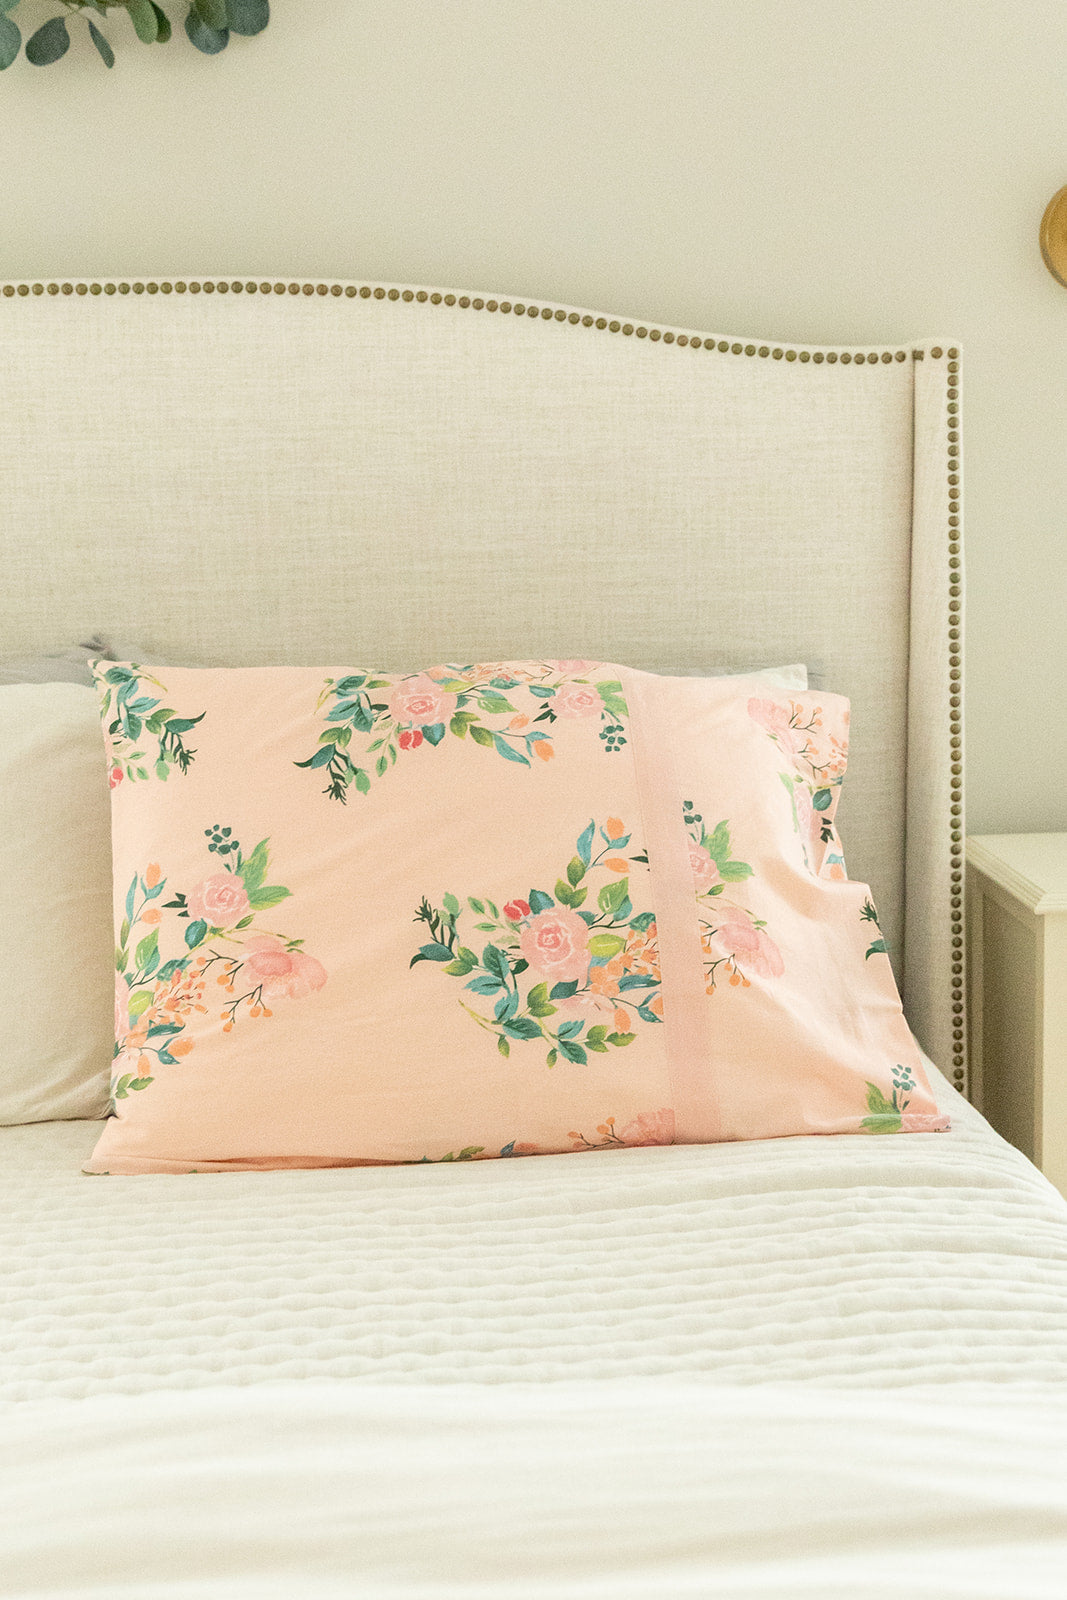 Nina Delivery Gownie & Matching Pillowcase Set